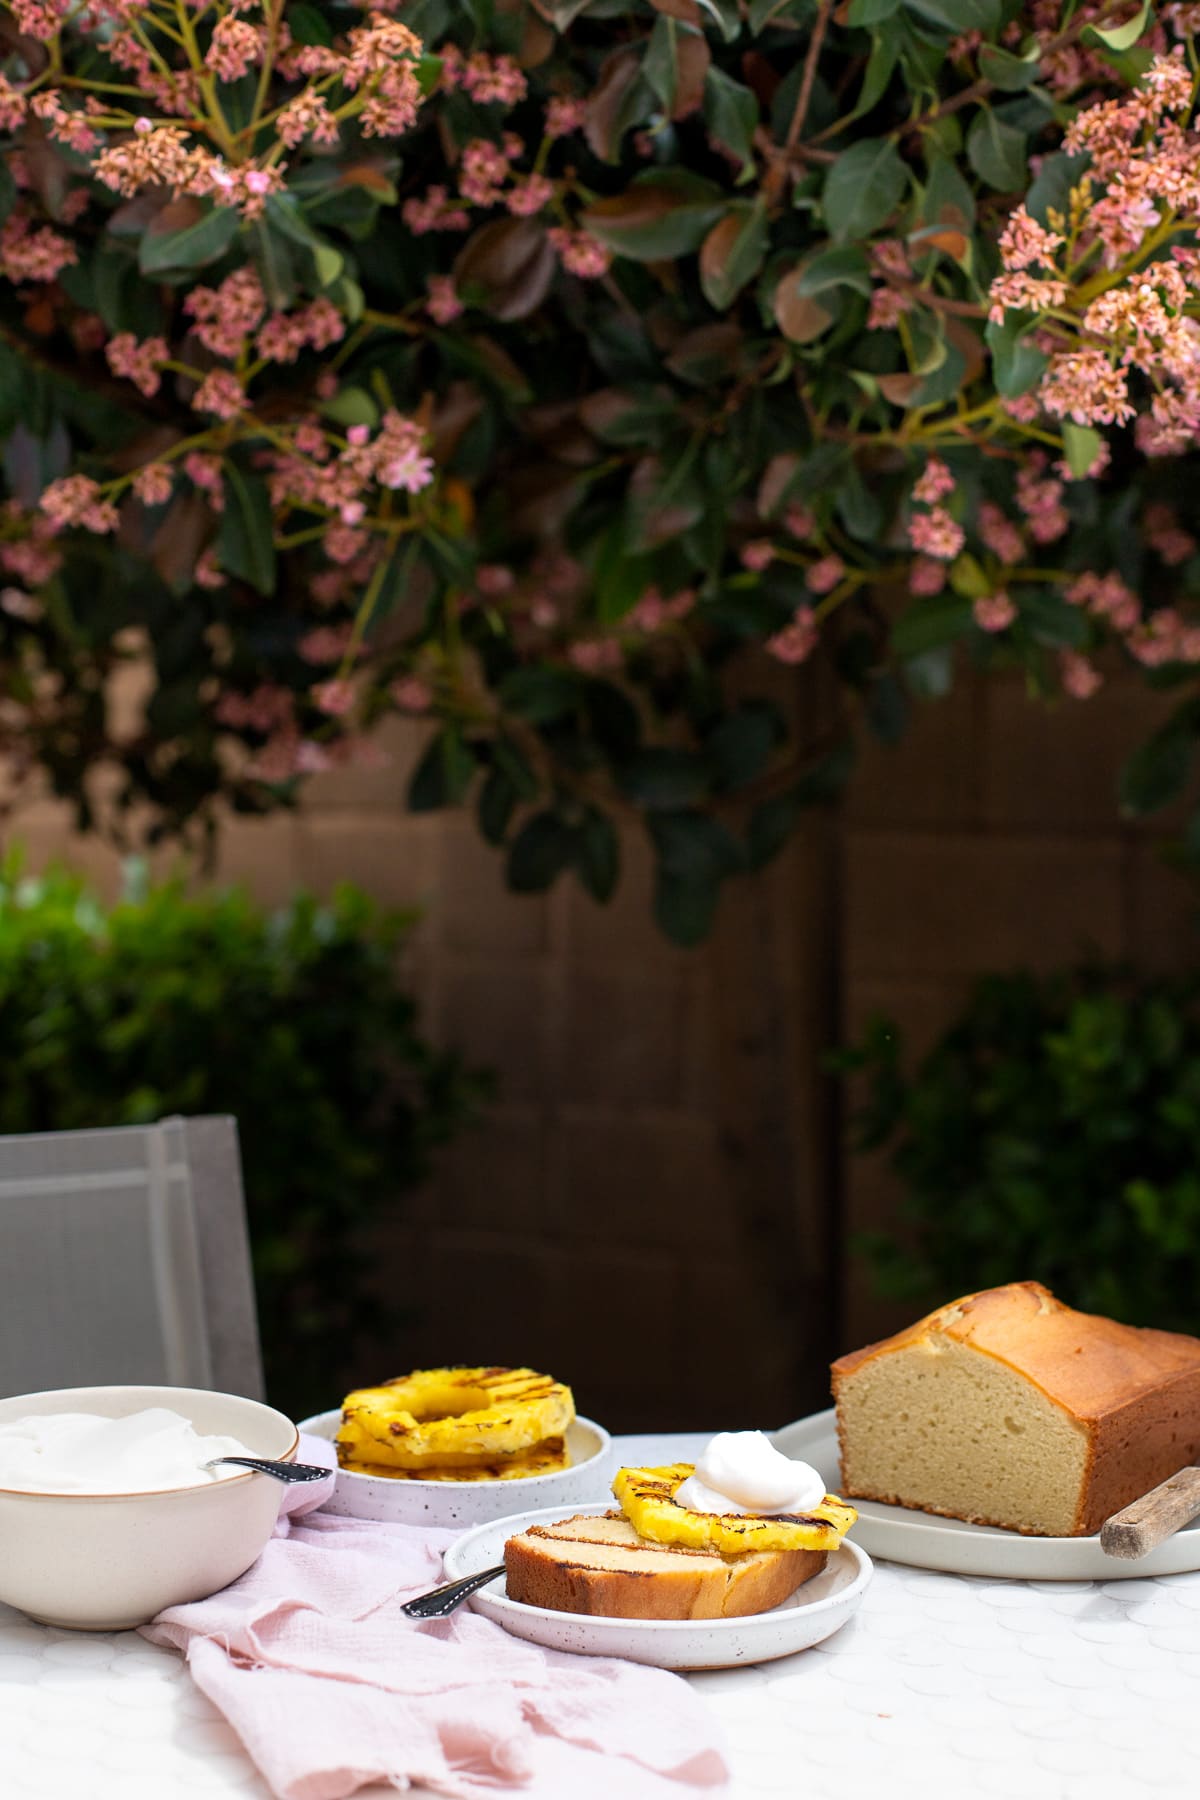 Pound cake being served with pineapple slices and whipped cream on a patio table.